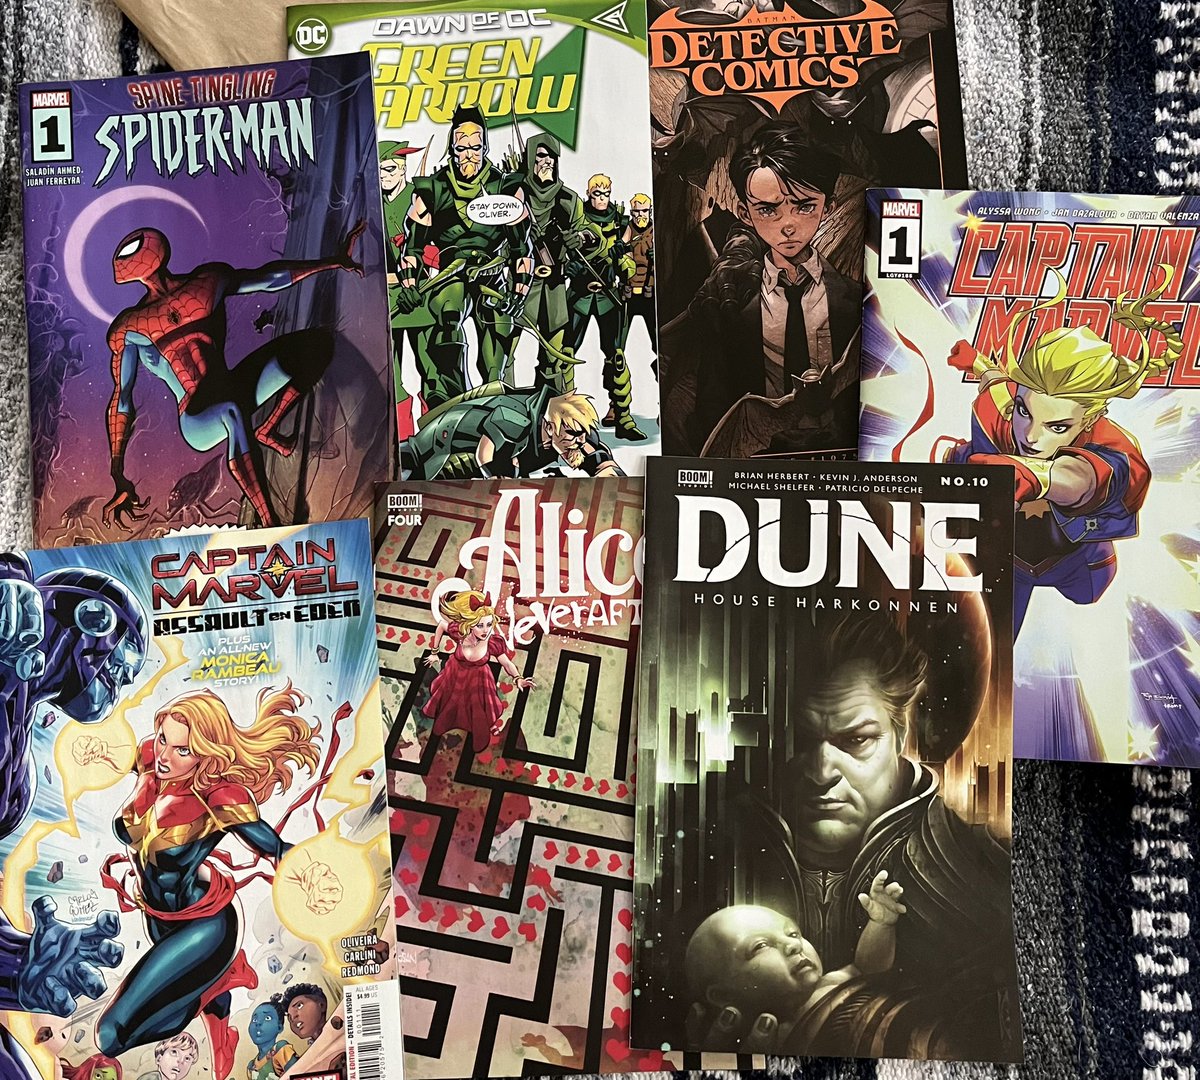 Great #comichaul on #newcomicbookday